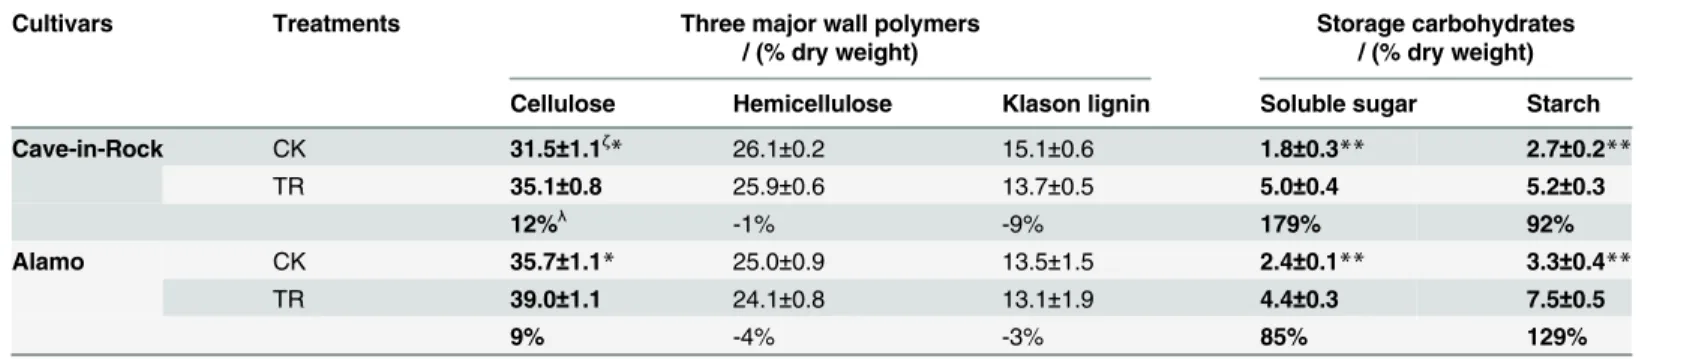 Table 2. Three major wall polymers and storage carbohydrates of stems.